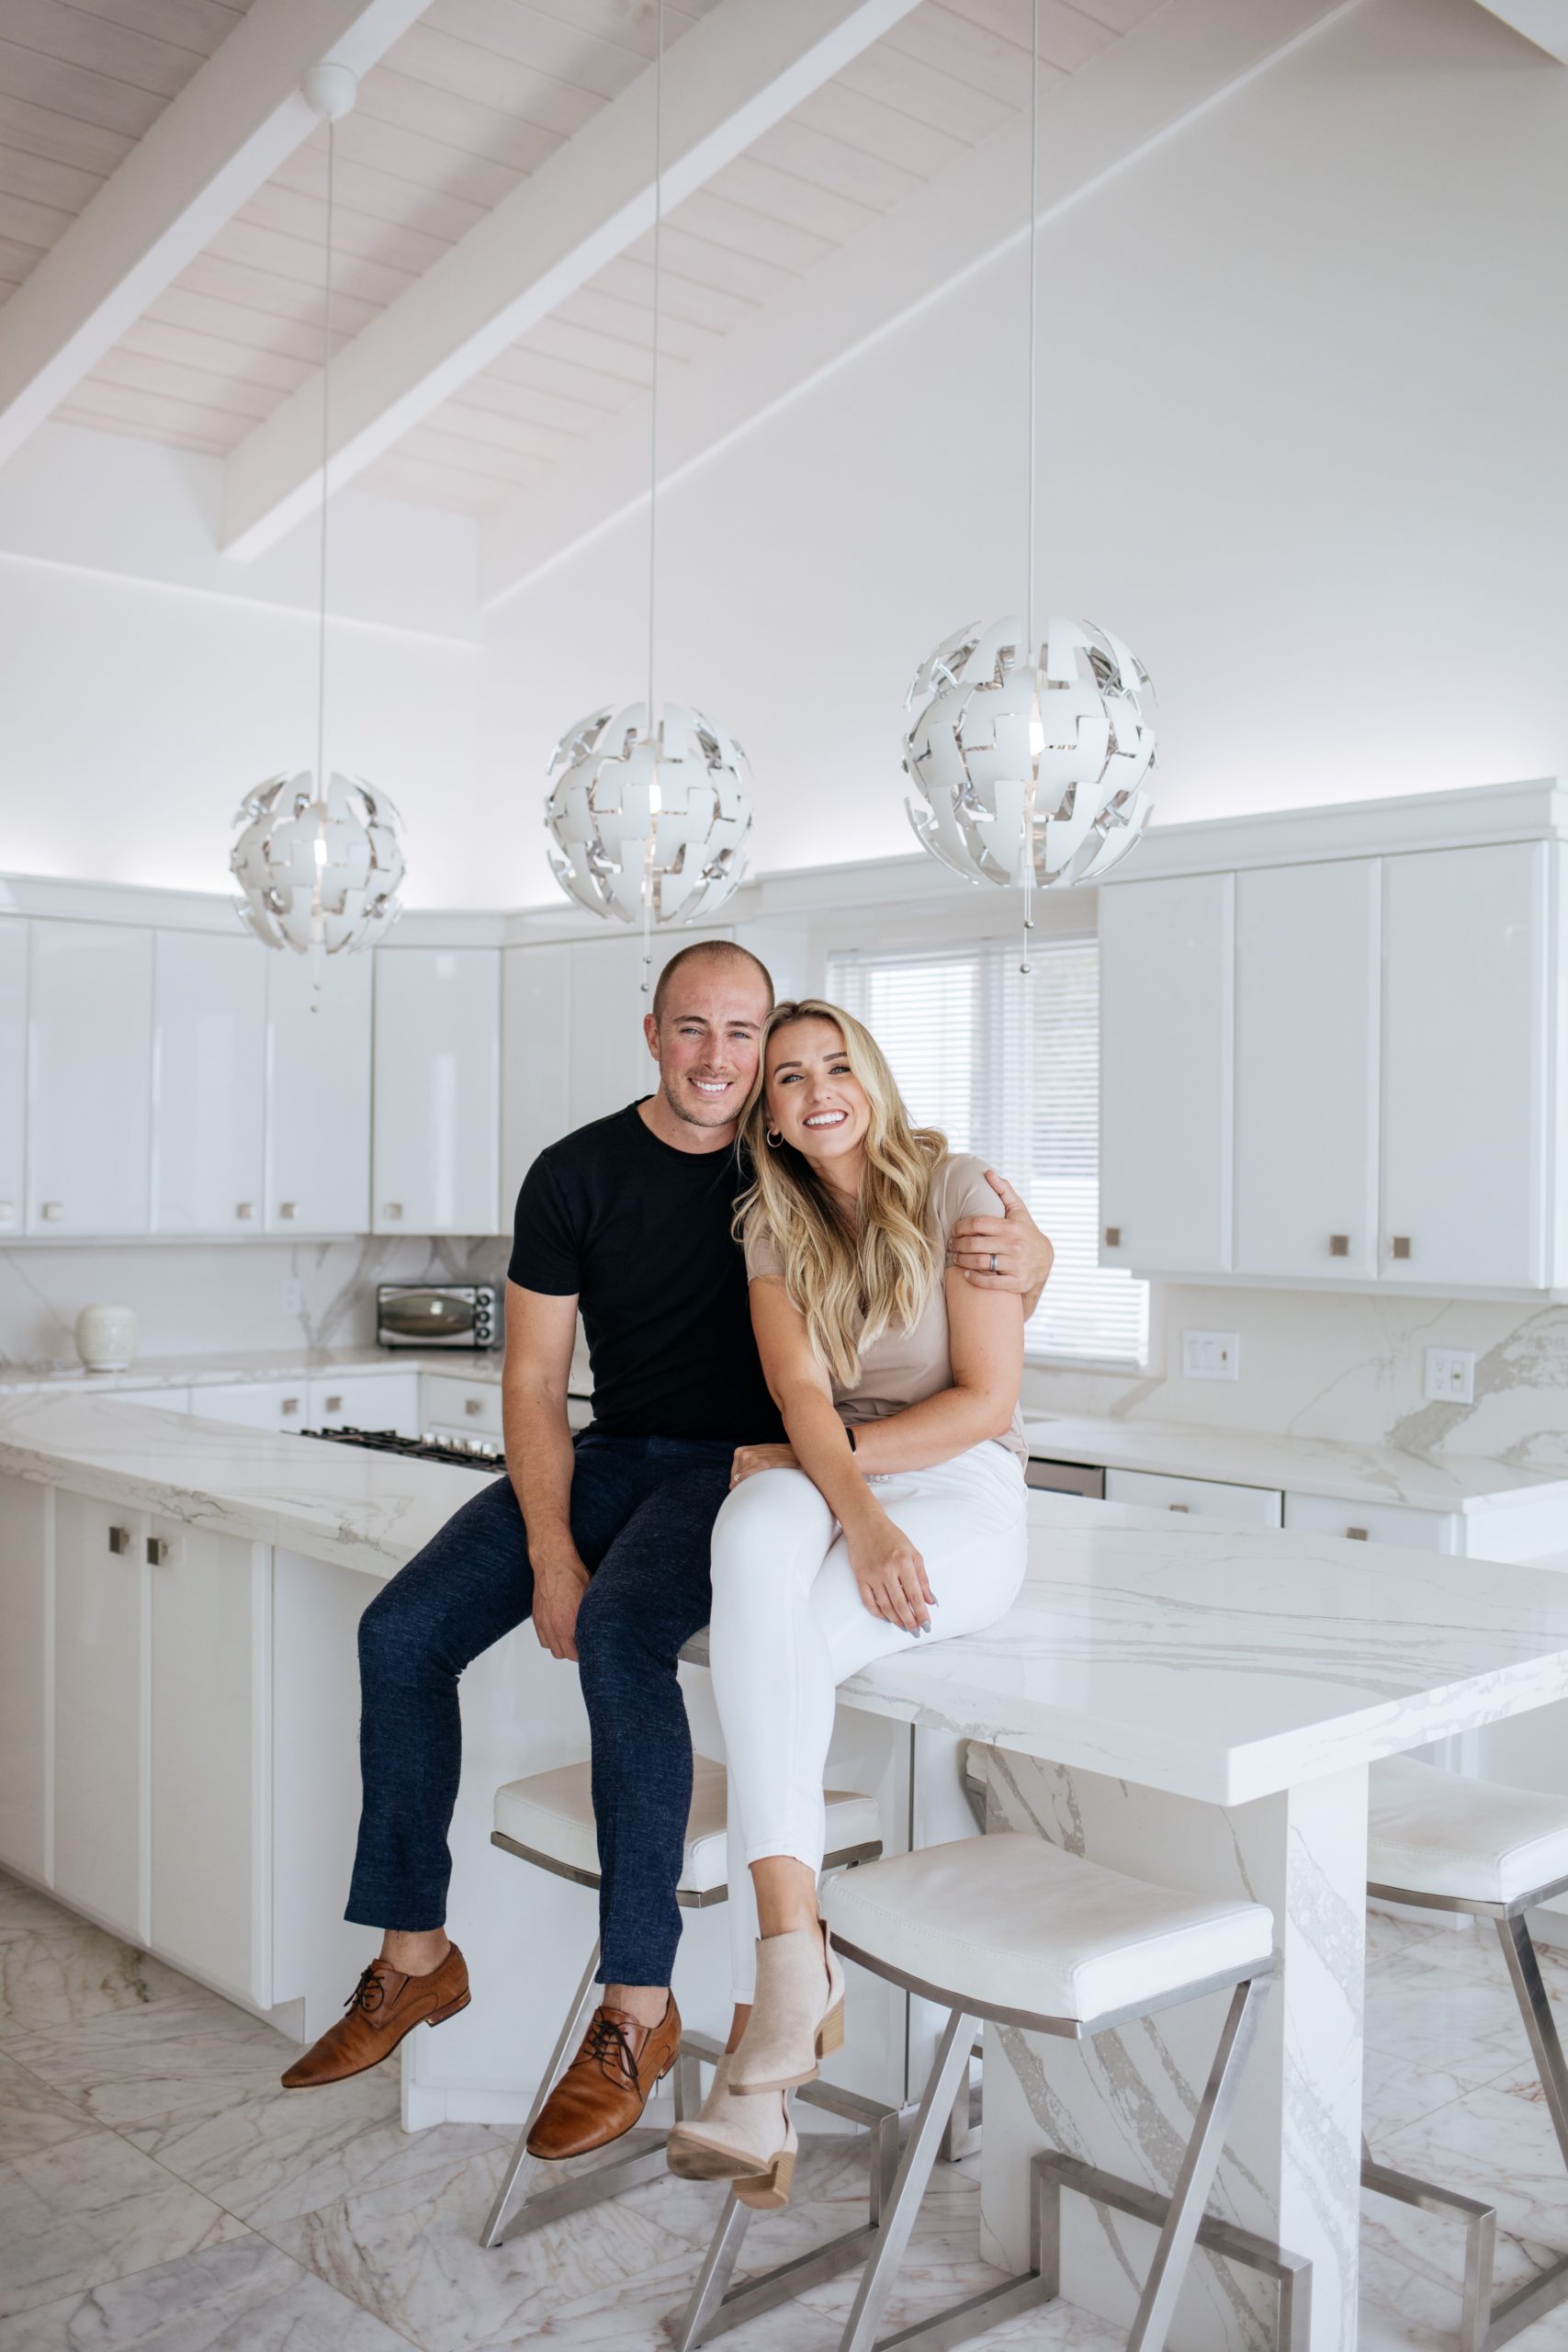 Sarasota Real Estate Agent Theresa Skrzypkowski. Click here to get inspired by this agent's fun and playful photoshoot in a luxury home!